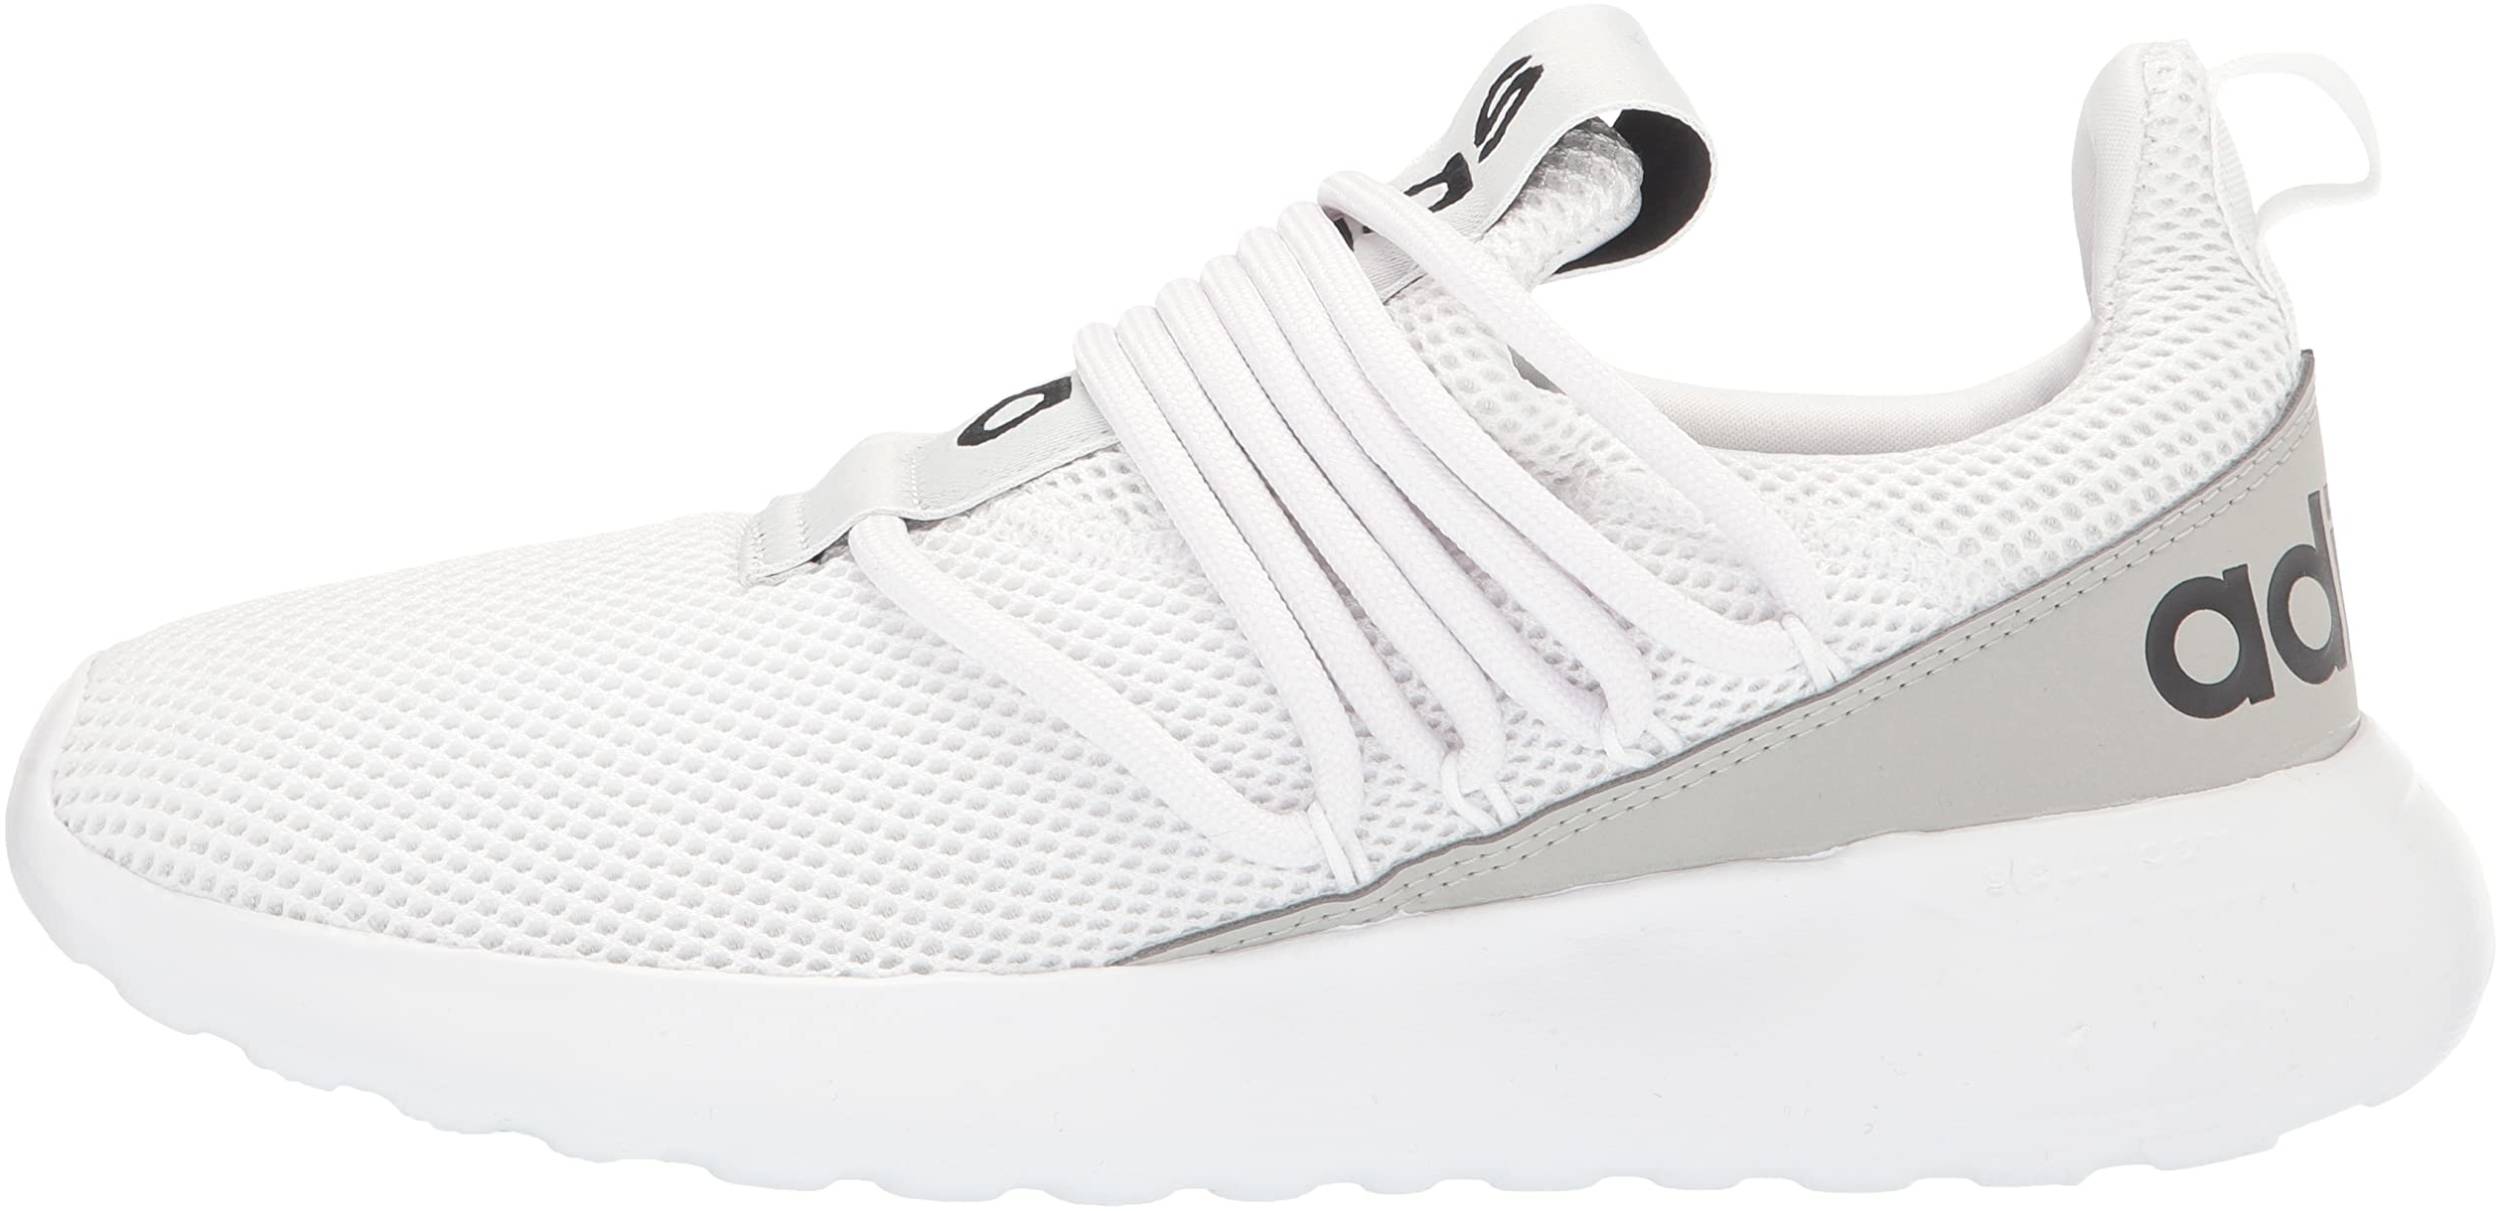 Eight volatility optional Adidas Lite Racer Adapt 3.0 sneakers in 10+ colors (only $35) | RunRepeat